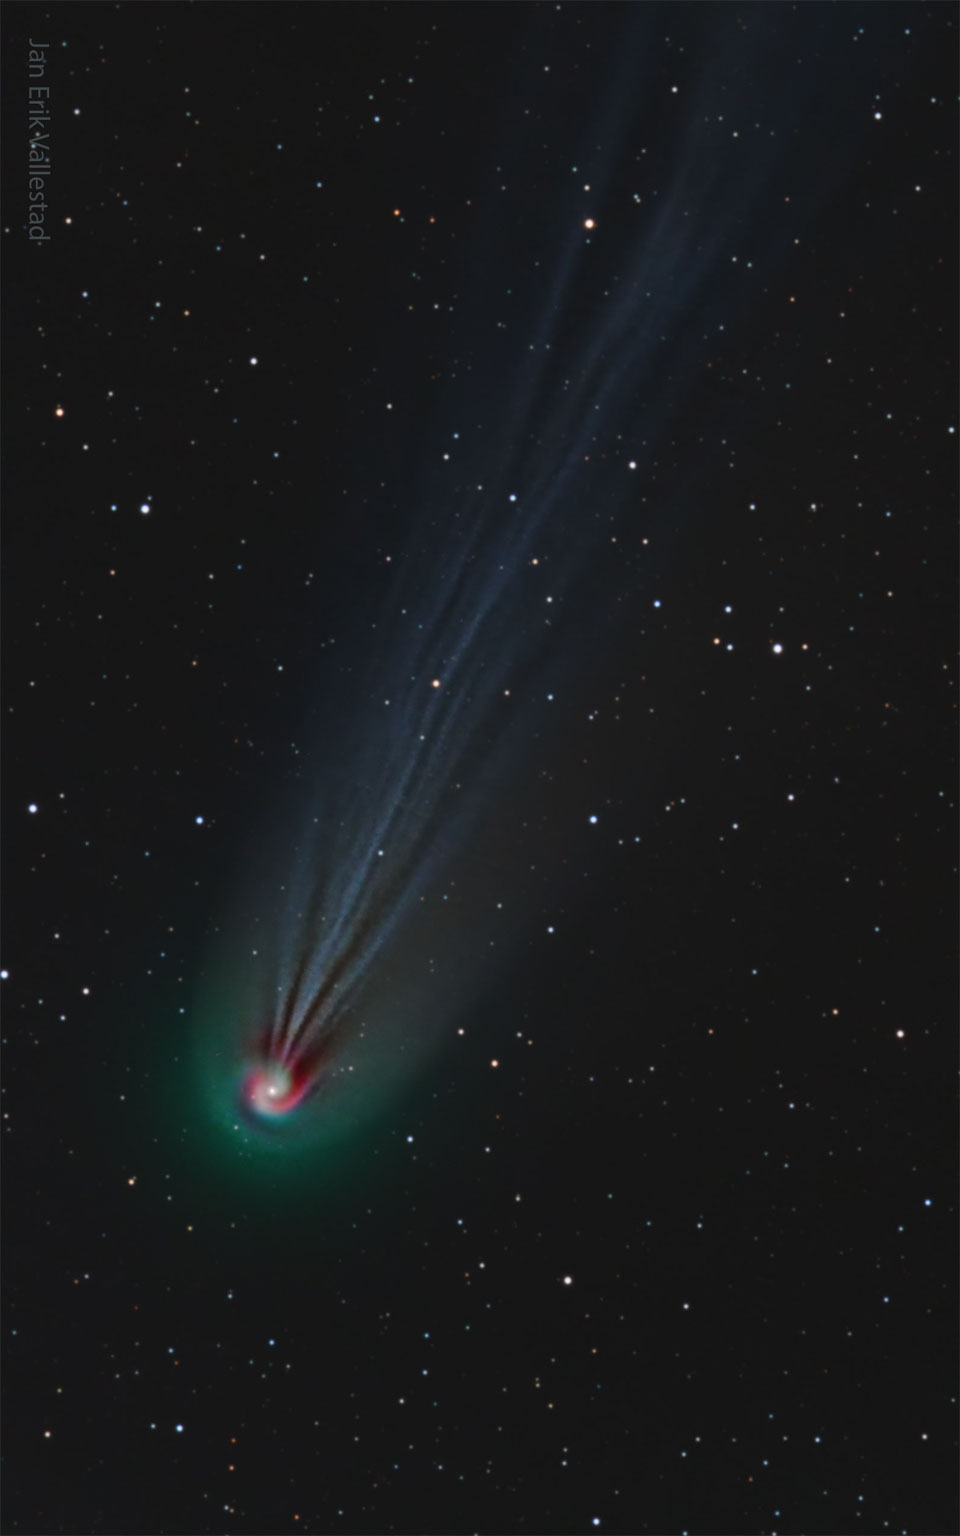 A comet is pictured with a really long and wavy ion tail.
The front of the comet -- its coma -- appears to be a spiral.
The coma is green, the tail is faint blue, and part of the 
swirl is red.
Please see the explanation for more detailed information.